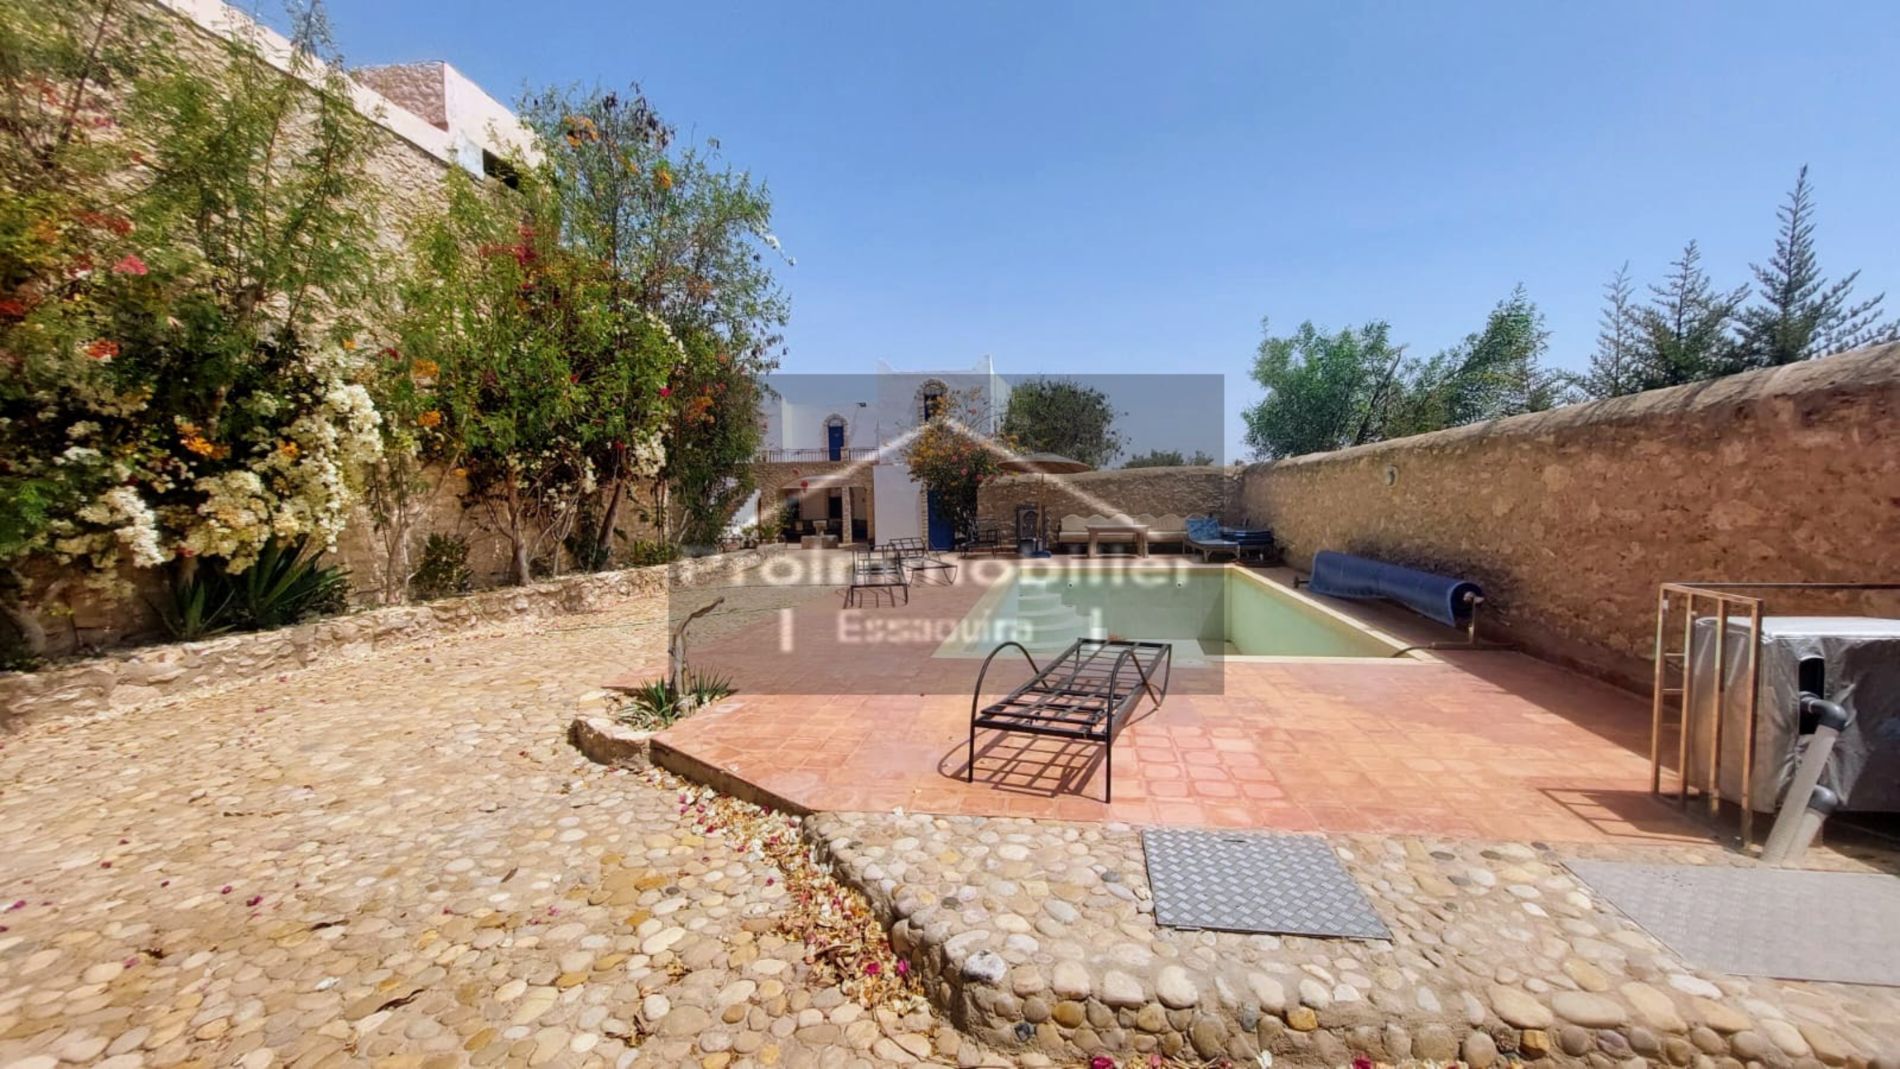 23-04-05-VM Beautiful House in countryside of 220 m² for sale in Essaouira Land 534 m²